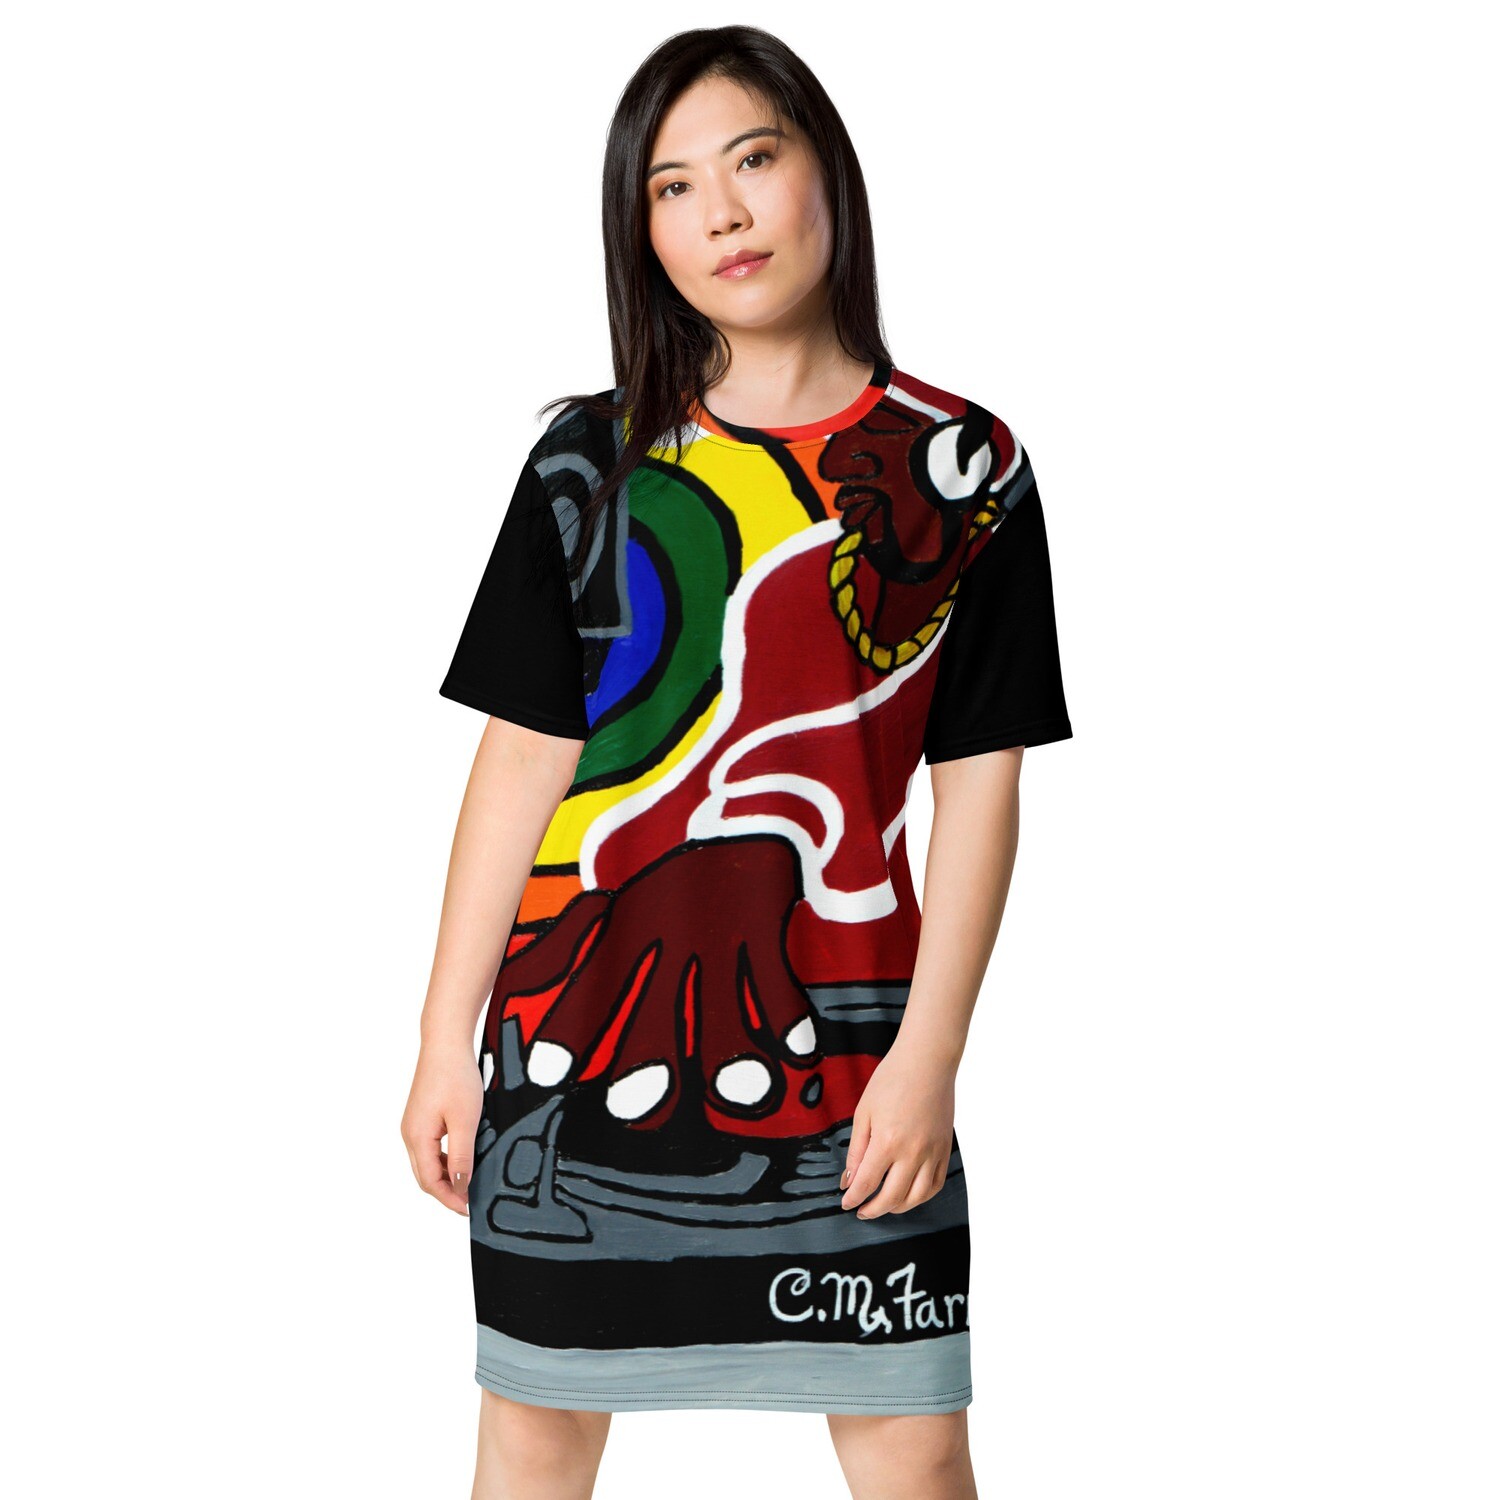 Move the Crowd T-shirt dress